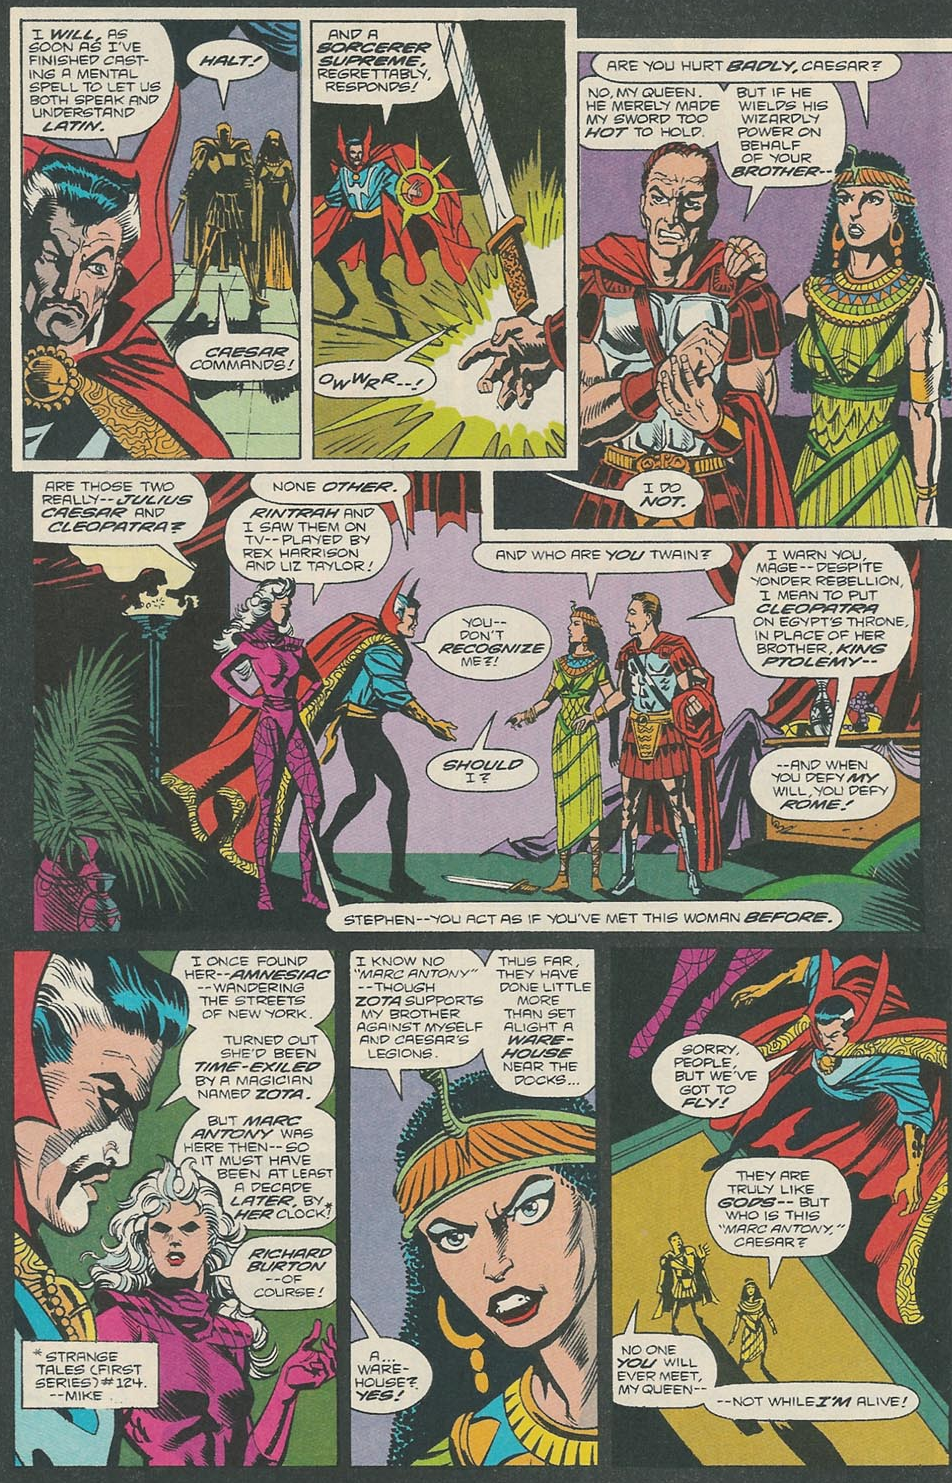 Doctor Strange and Clea, in their astral forms, accidentally stumble upon Cleopatra and Julius Caesar in Doctor Strange, Sorcerer Supreme Vol. 1 #33 "The Alexandria Quantrain" (1991), Marvel Comics. Words by Roy Thomas and Dann Thomas, art by Chris Marrinan, Mark McKenna, George Roussos, and Pat Brosseau.